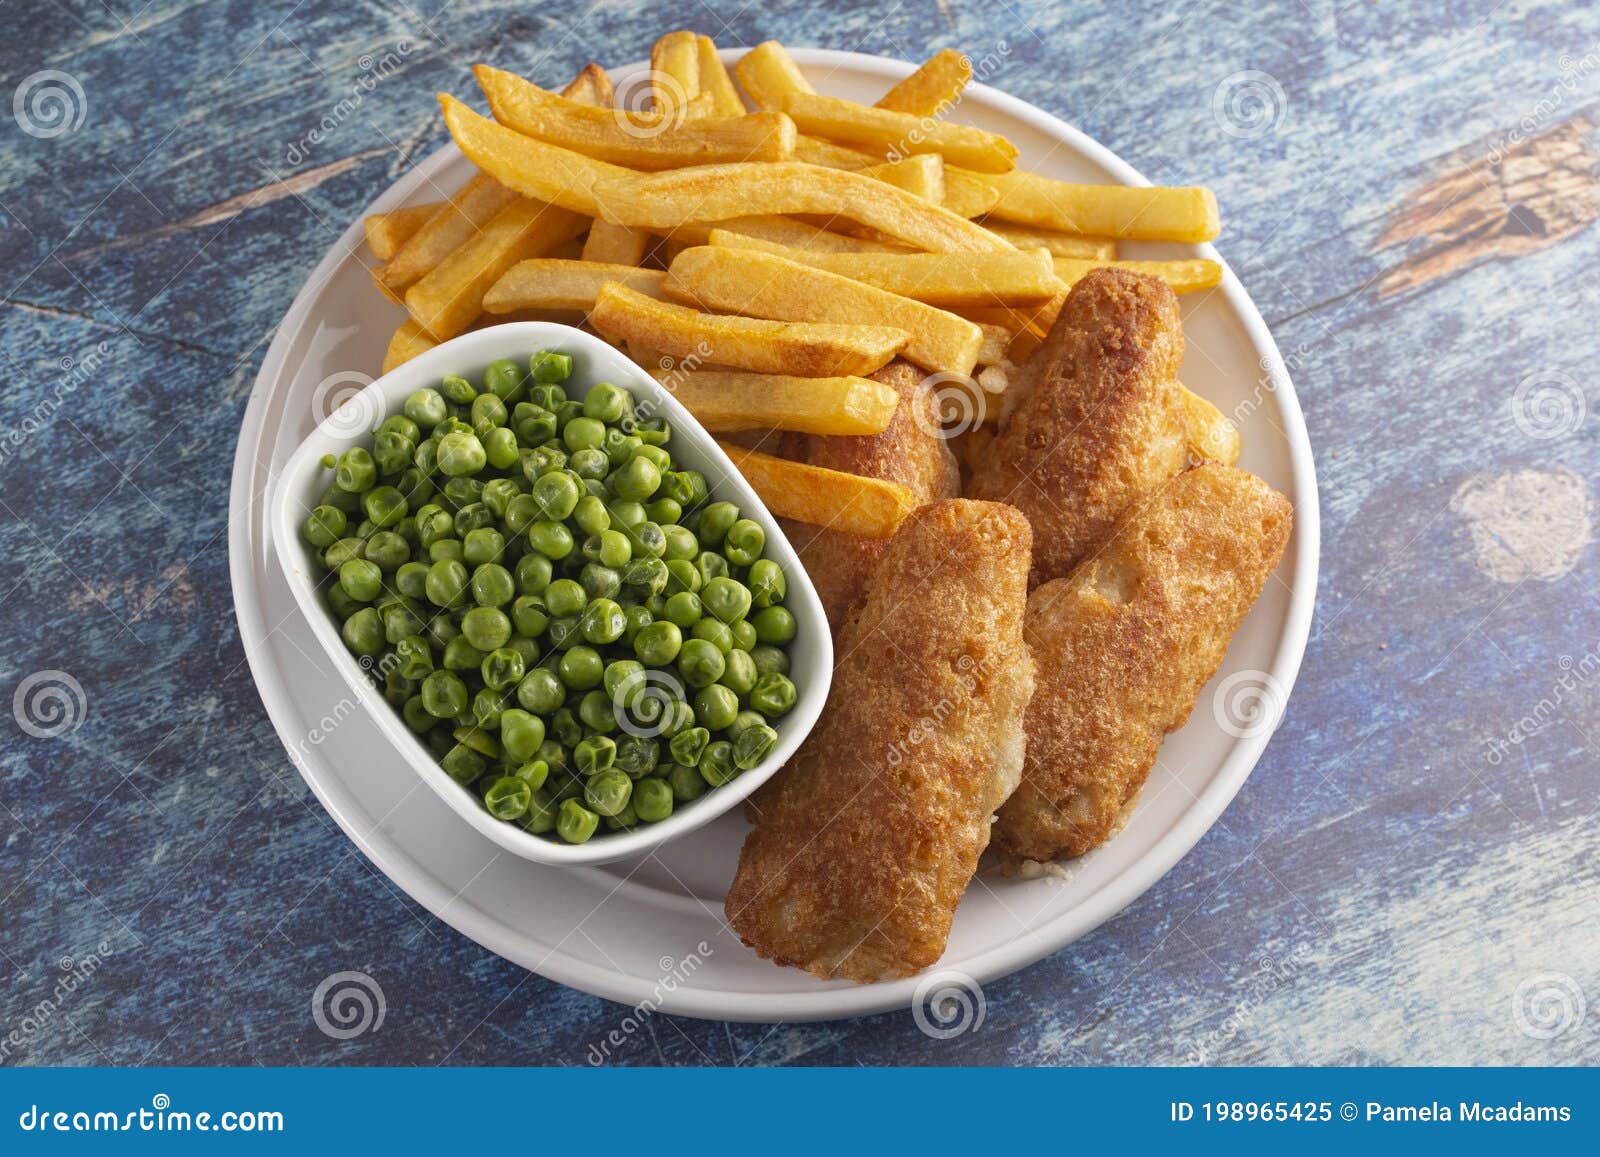 A Meal of Beer Battered Fish Chips and Peas Stock Image - Image of ...